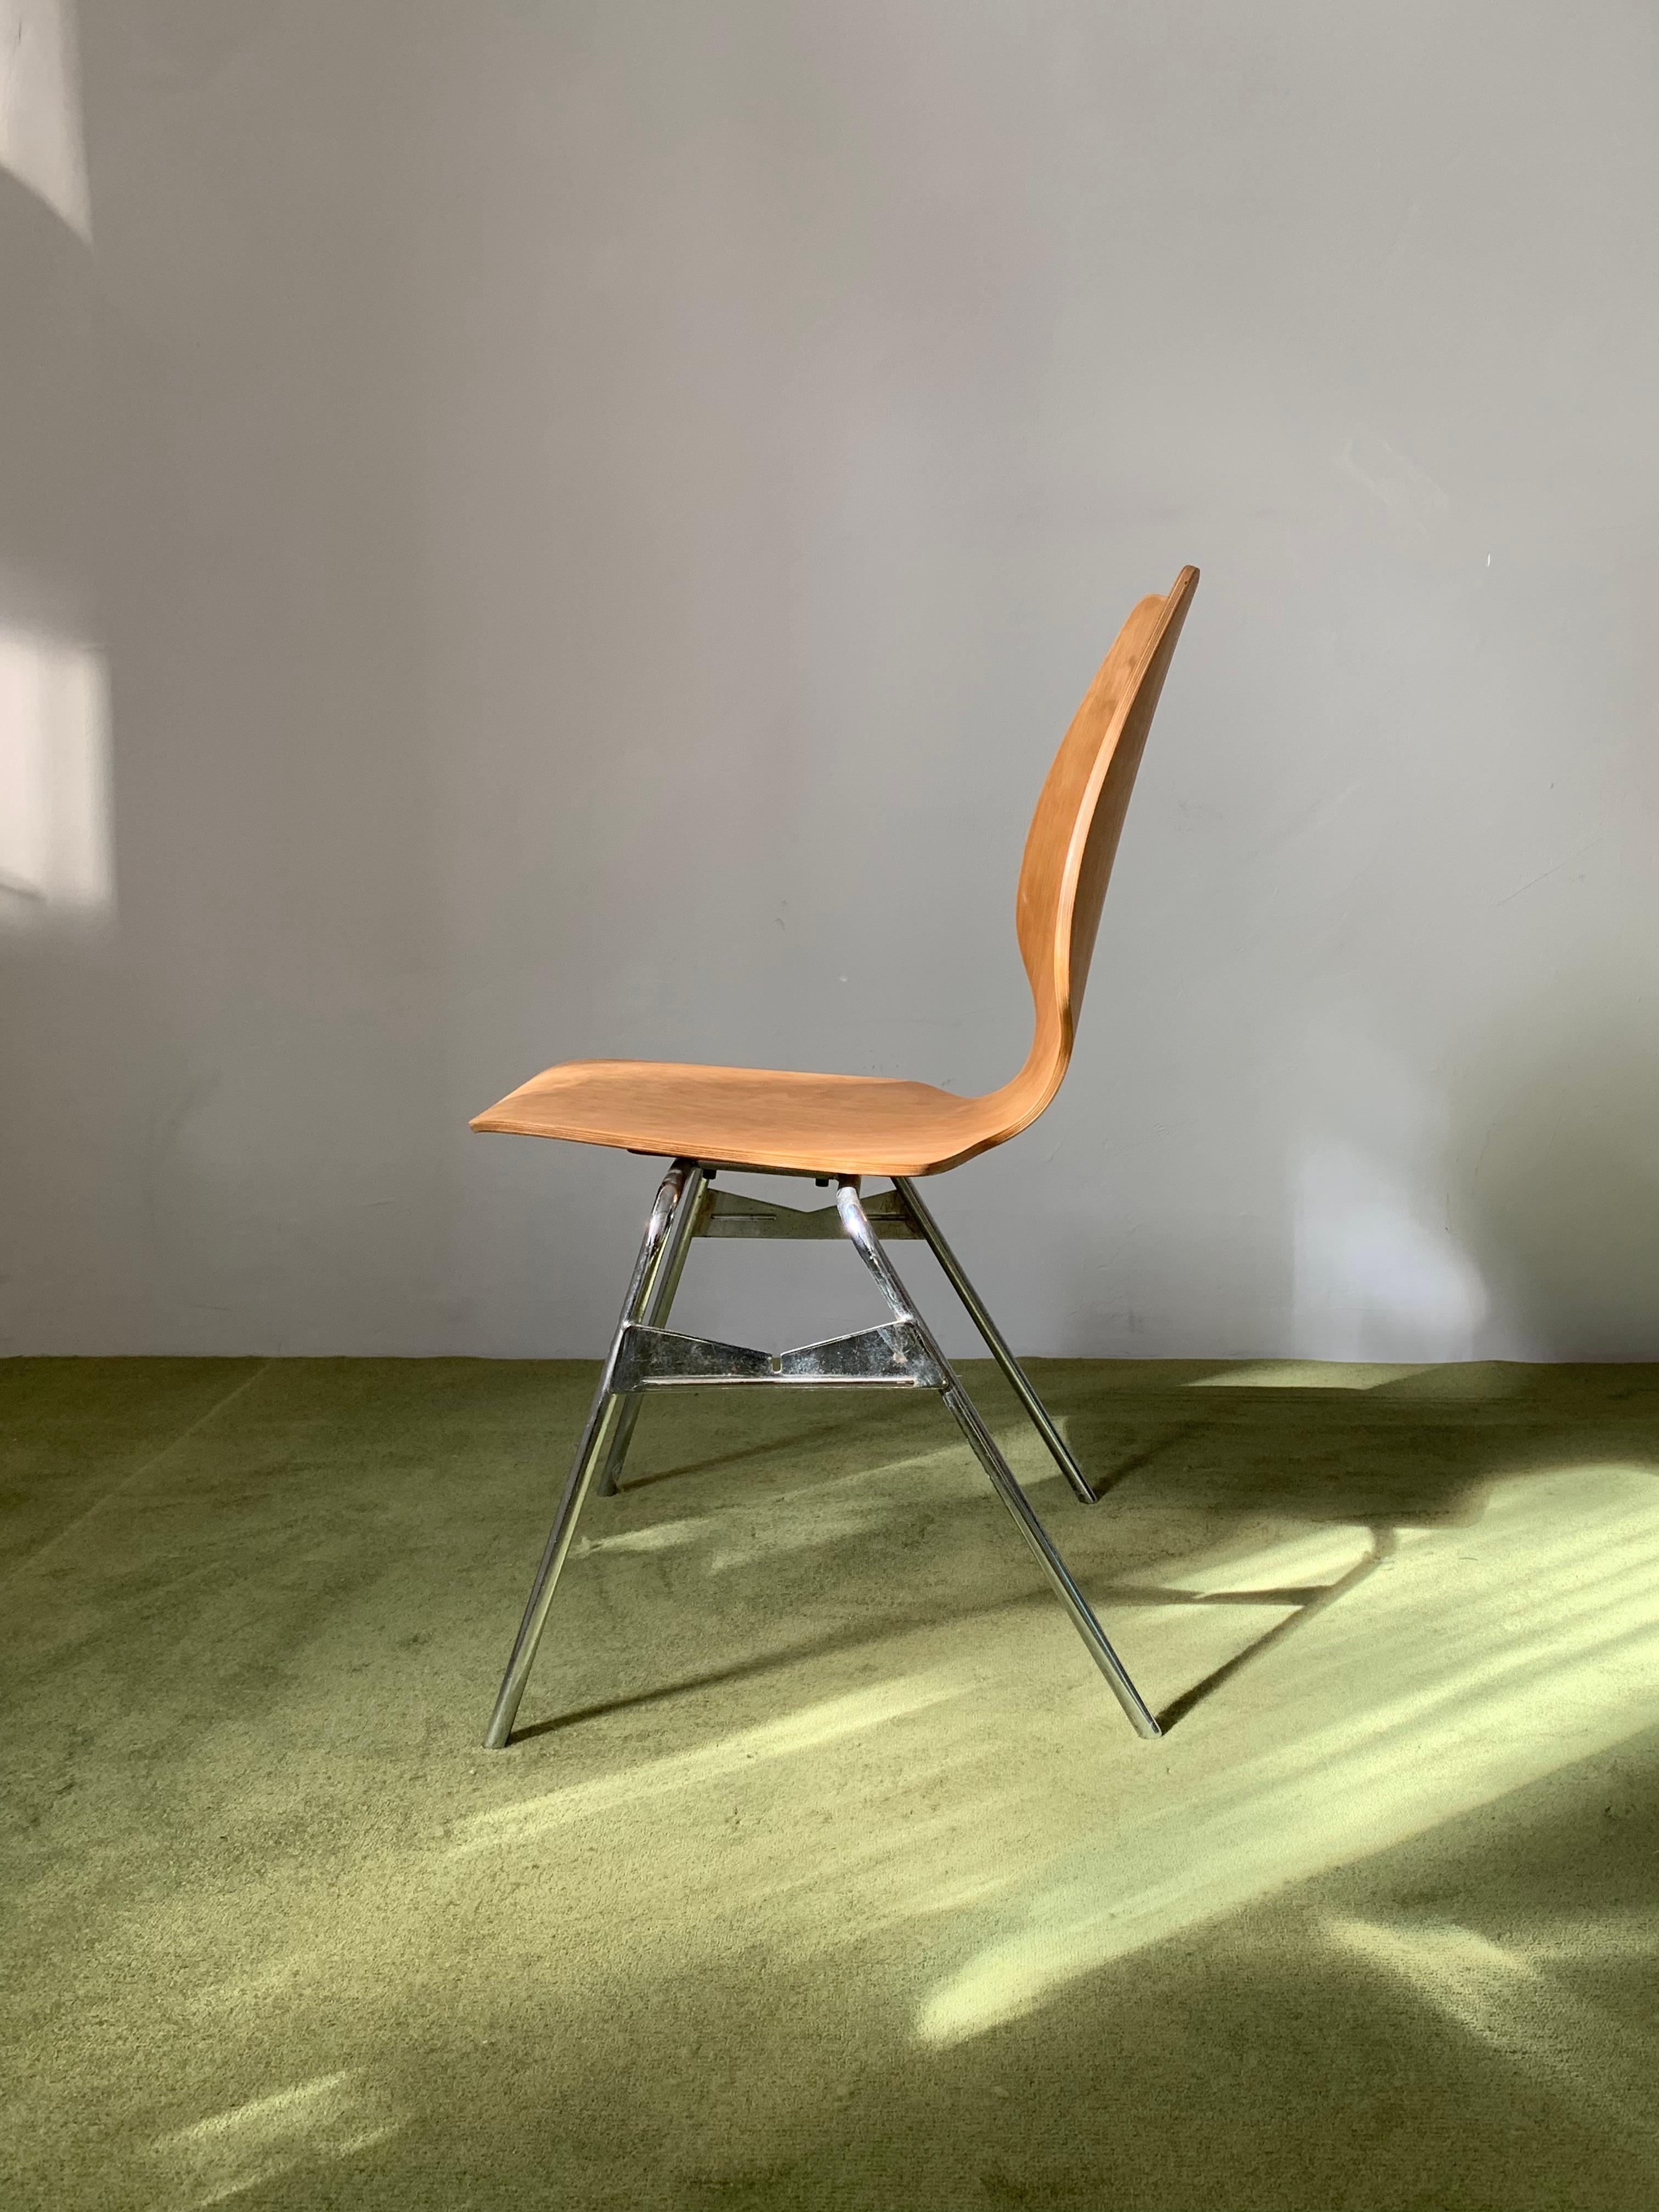 Steel Vintage Swiss Industrial  Design Plywood Stacking Chair by Horgen Glarus 1960's For Sale